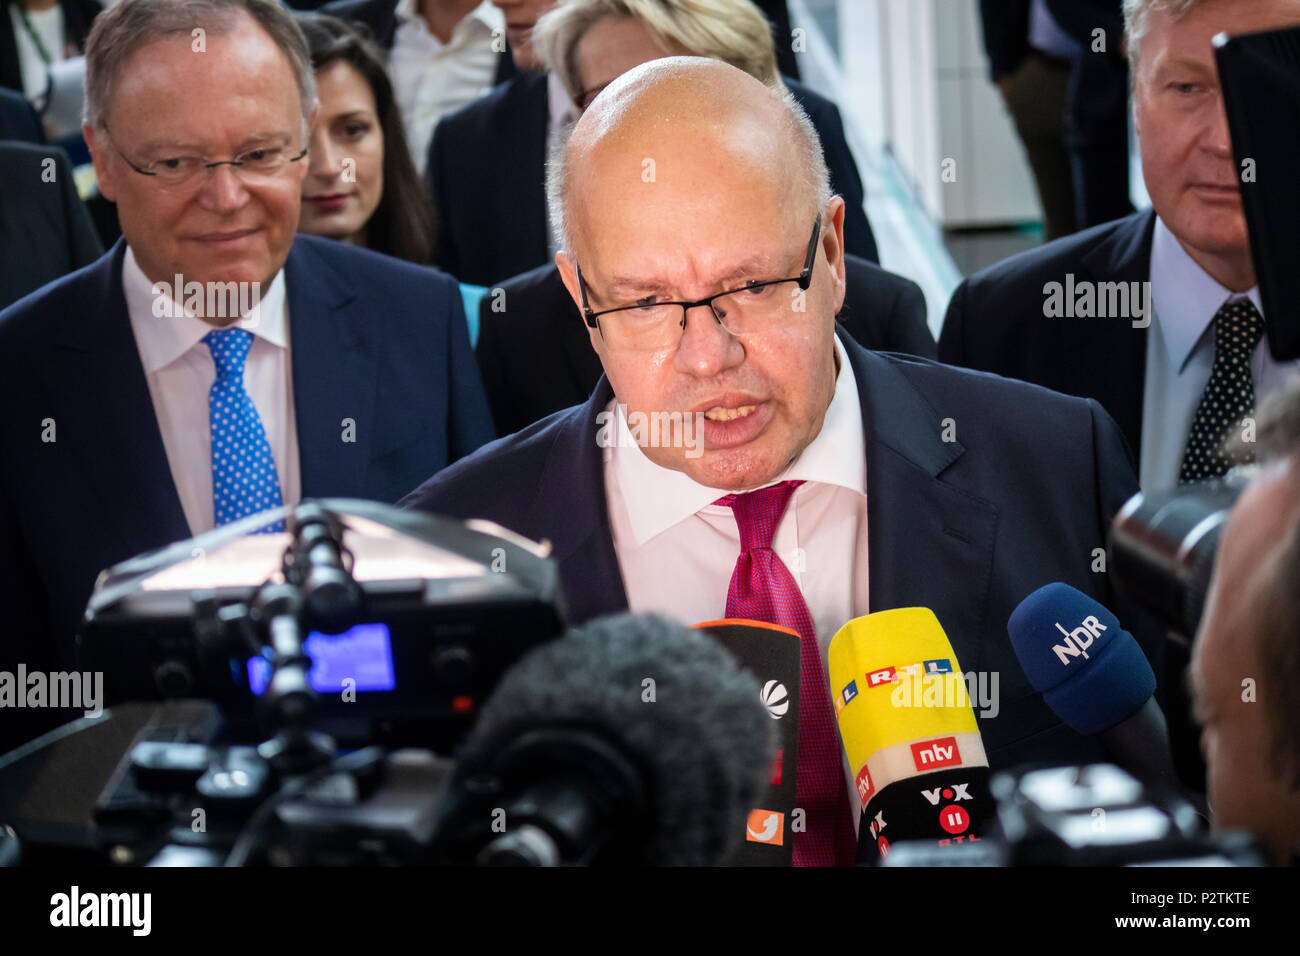 Hannover, Germany. 12th June, 2018. CEBIT 2018 opening walk with Peter Altmaier (M), Federal Minister for Economic Affairs and Energy Germany. In interview with journalists. On the left: Stephan Weil, Prime Minister of Lower Saxony. CEBIT 2018, international computer expo and Europe's Business Festival for Innovation and Digitization. Credit: Christian Lademann / Alamy Live News Stock Photo